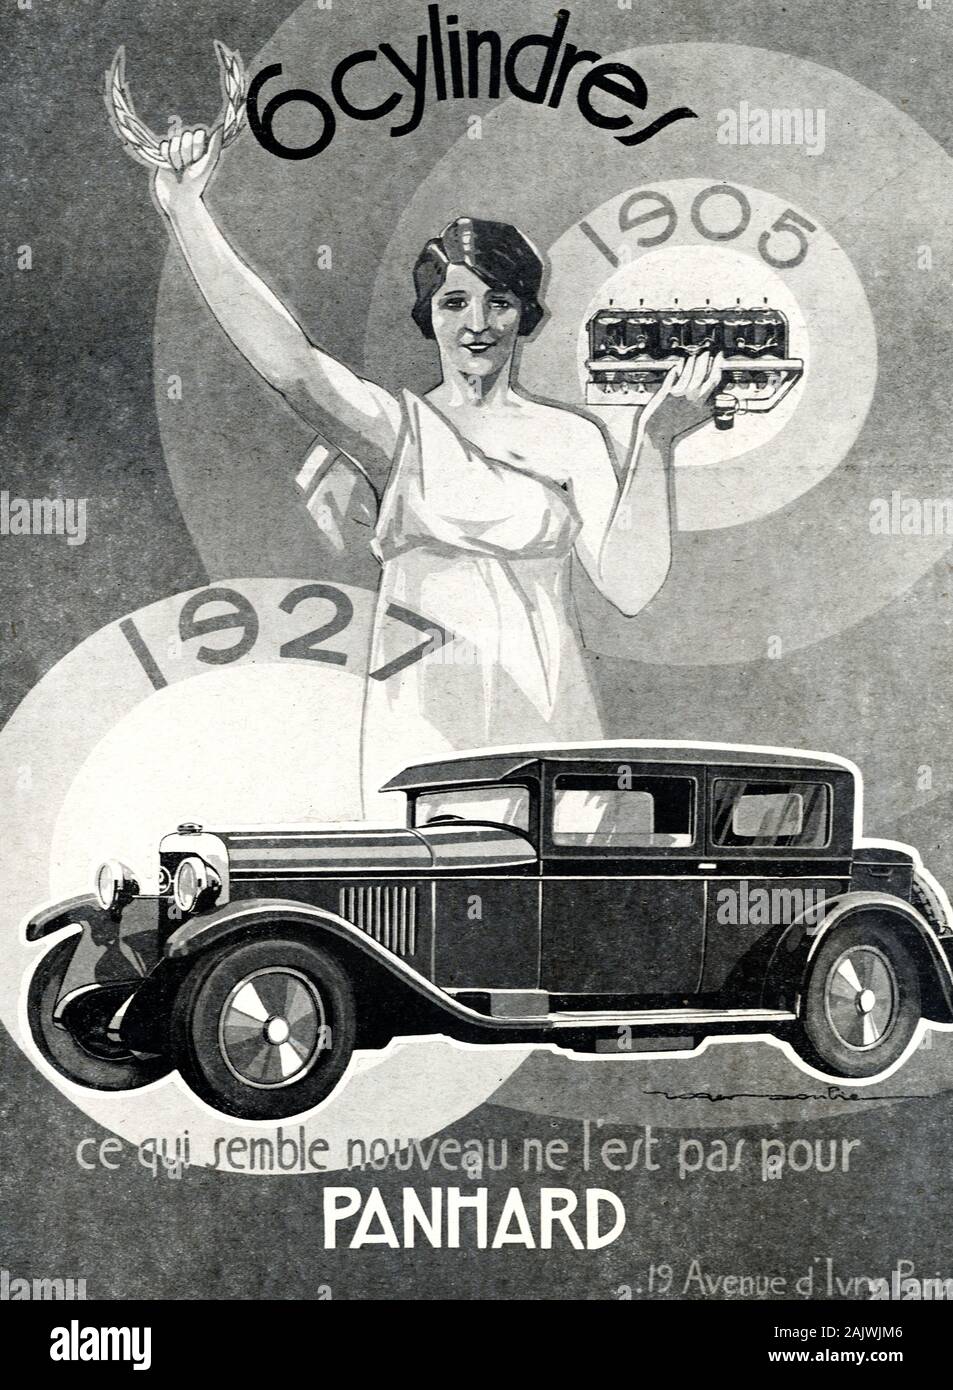 Old Advert, Vintage Advert, Advertisement or Publicity for Panhard 6 cylnder 1927 Model French Luxury Car with Flapper Woman Holding Engine. Advert 1927 Stock Photo